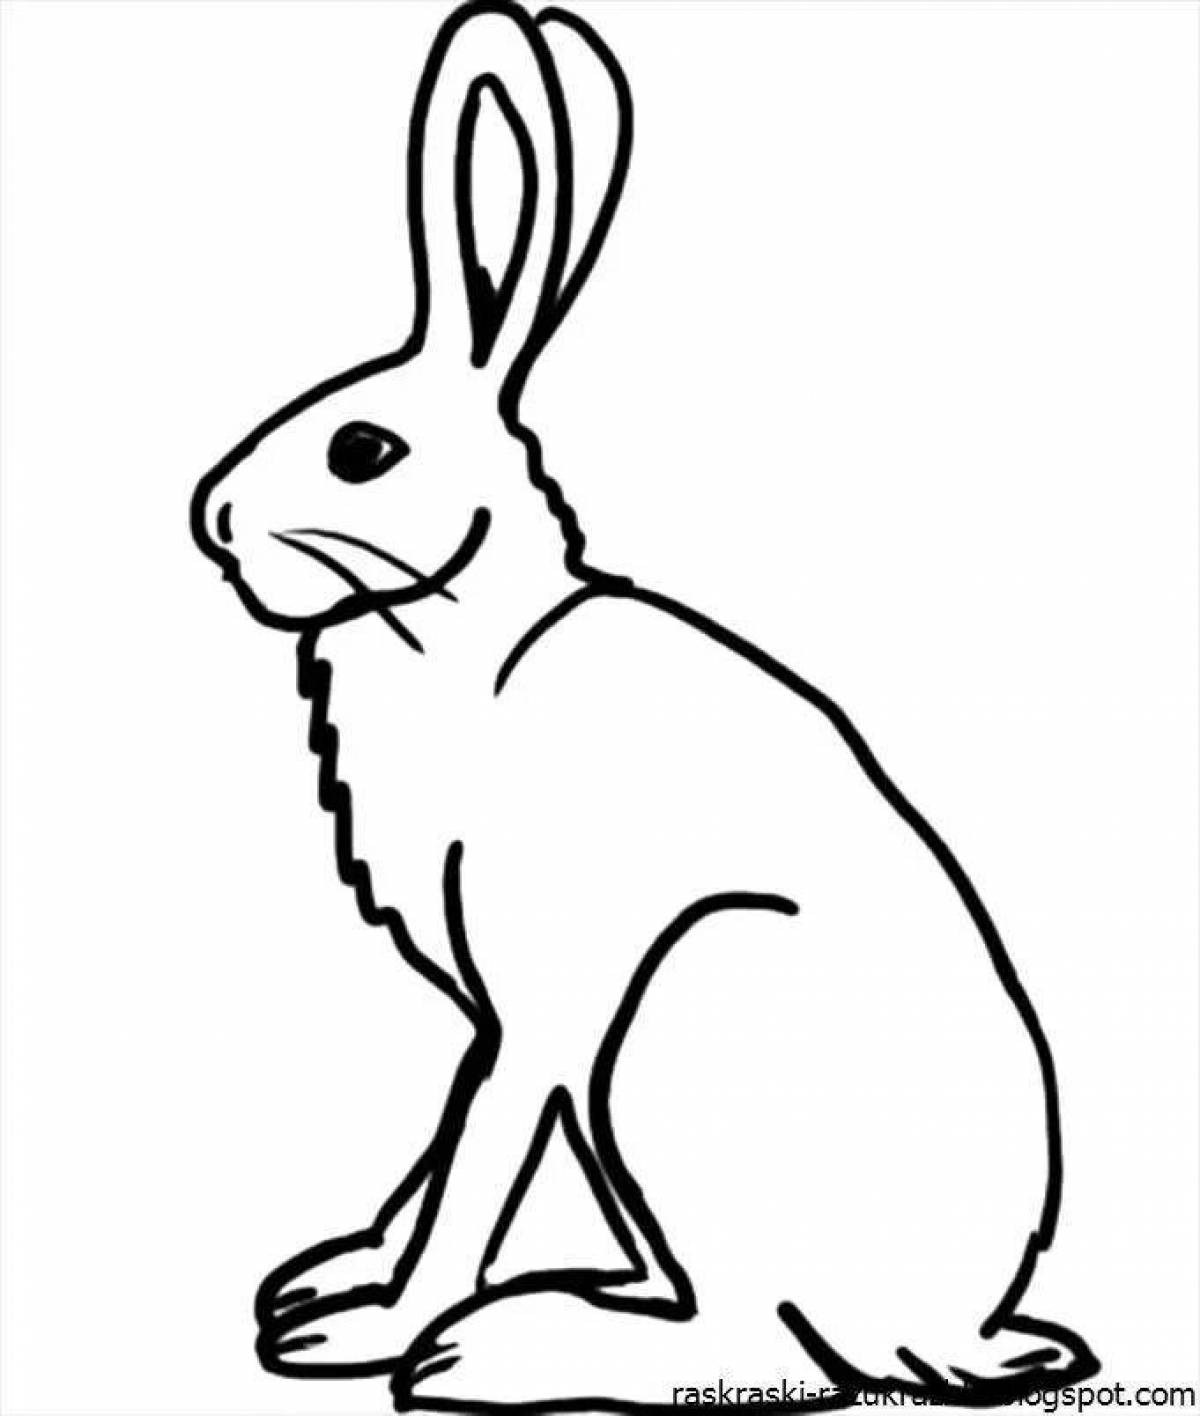 Coloring book beckoning white hare